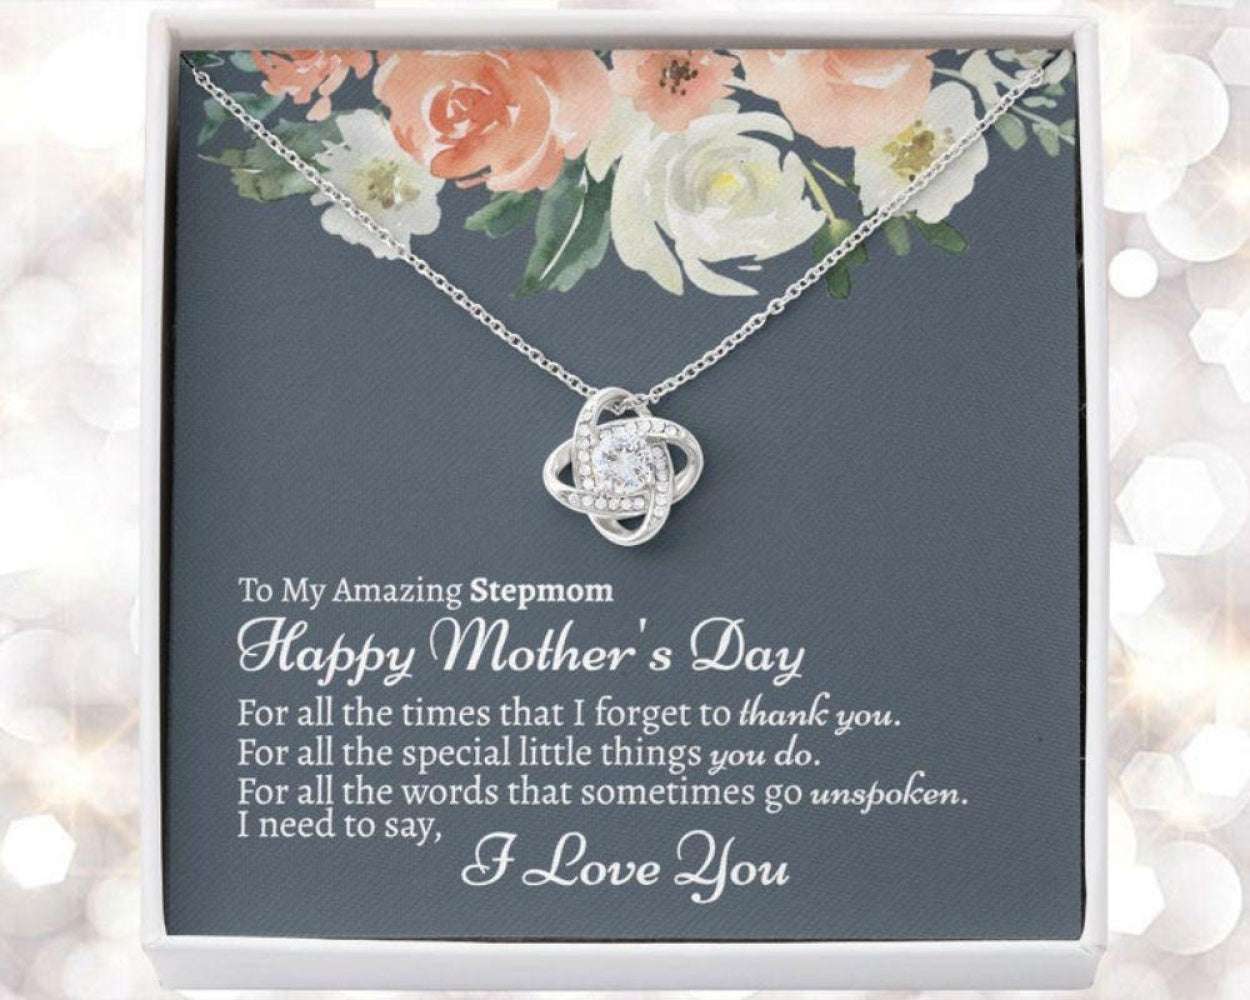 Stepmom Necklace Mothers Day Necklace Gift, Gift For Stepmom, Stepmother Gifts for Mother (Mom) Rakva